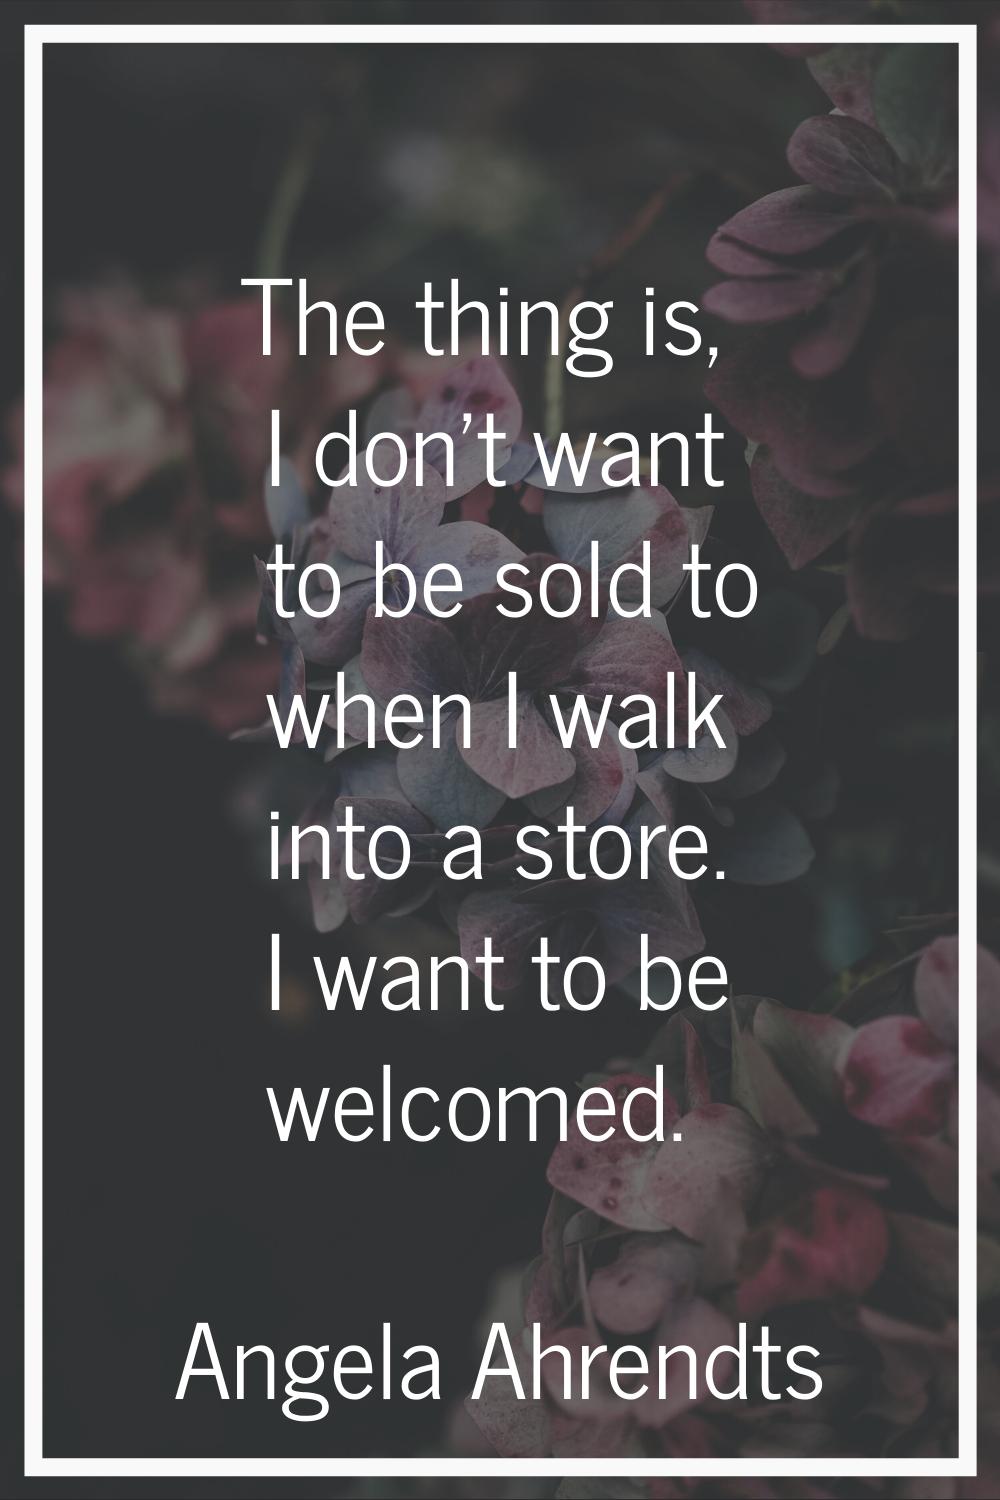 The thing is, I don't want to be sold to when I walk into a store. I want to be welcomed.